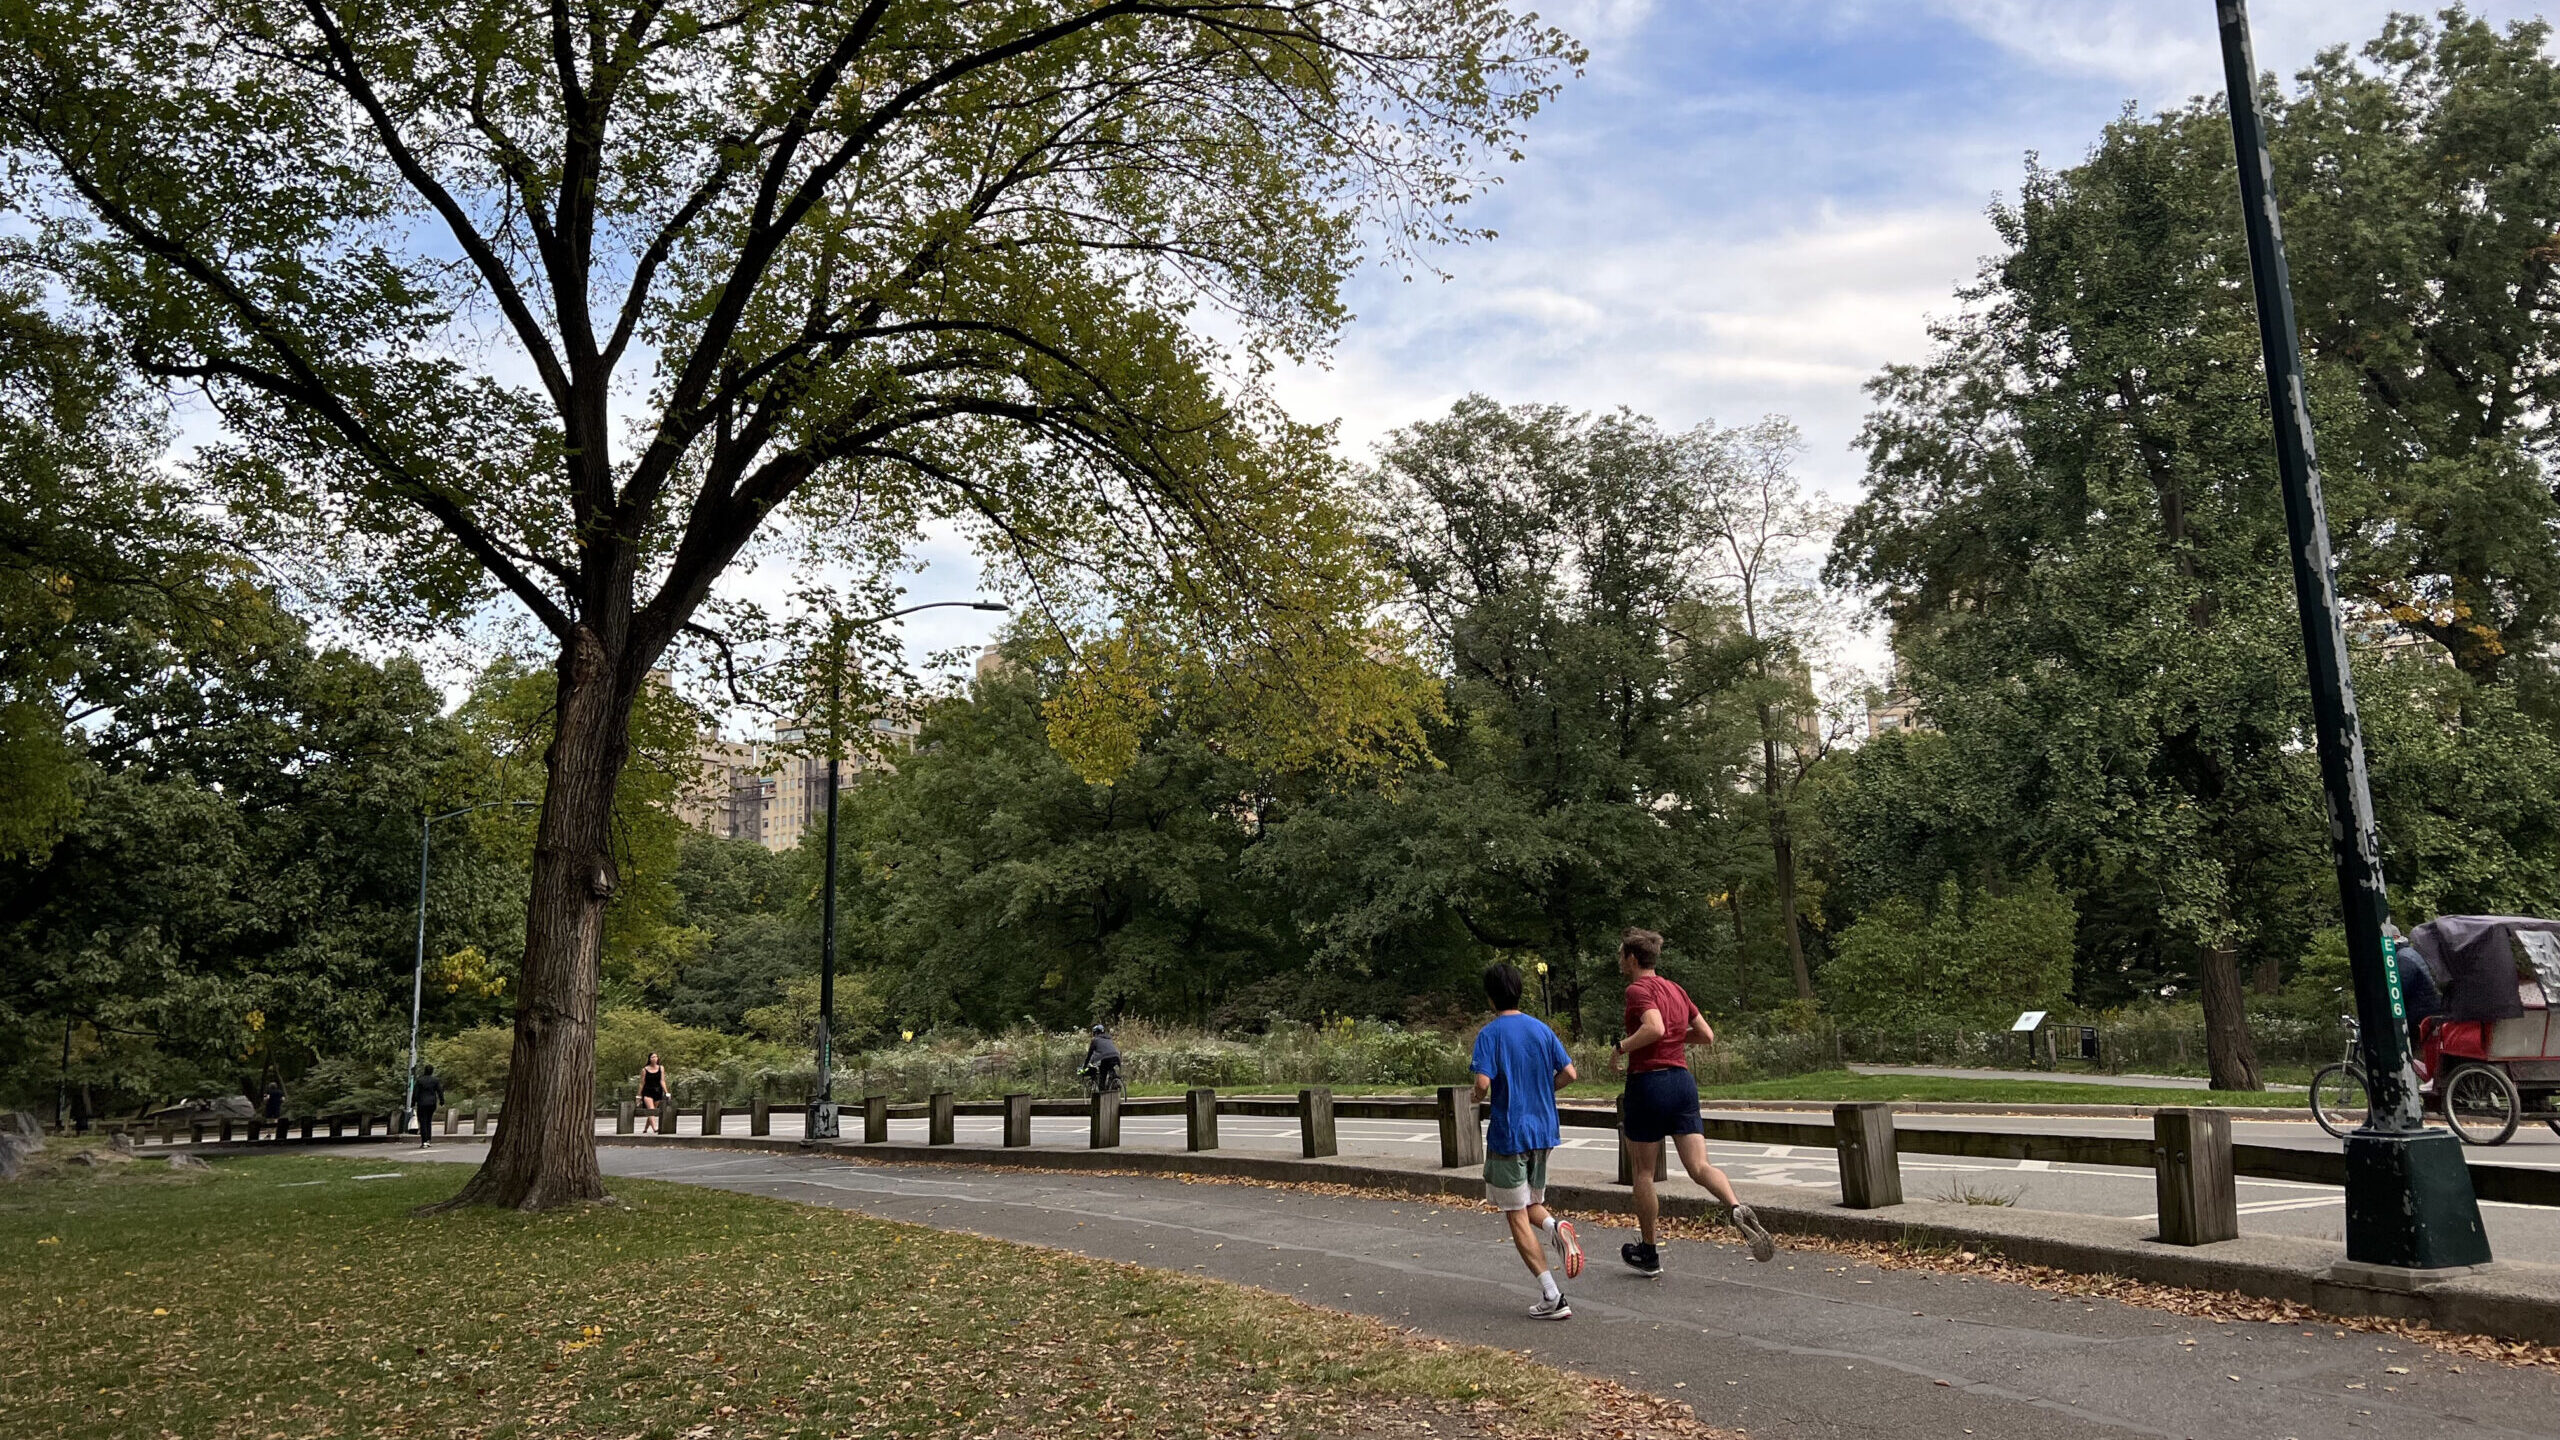 Runners outside of Central park